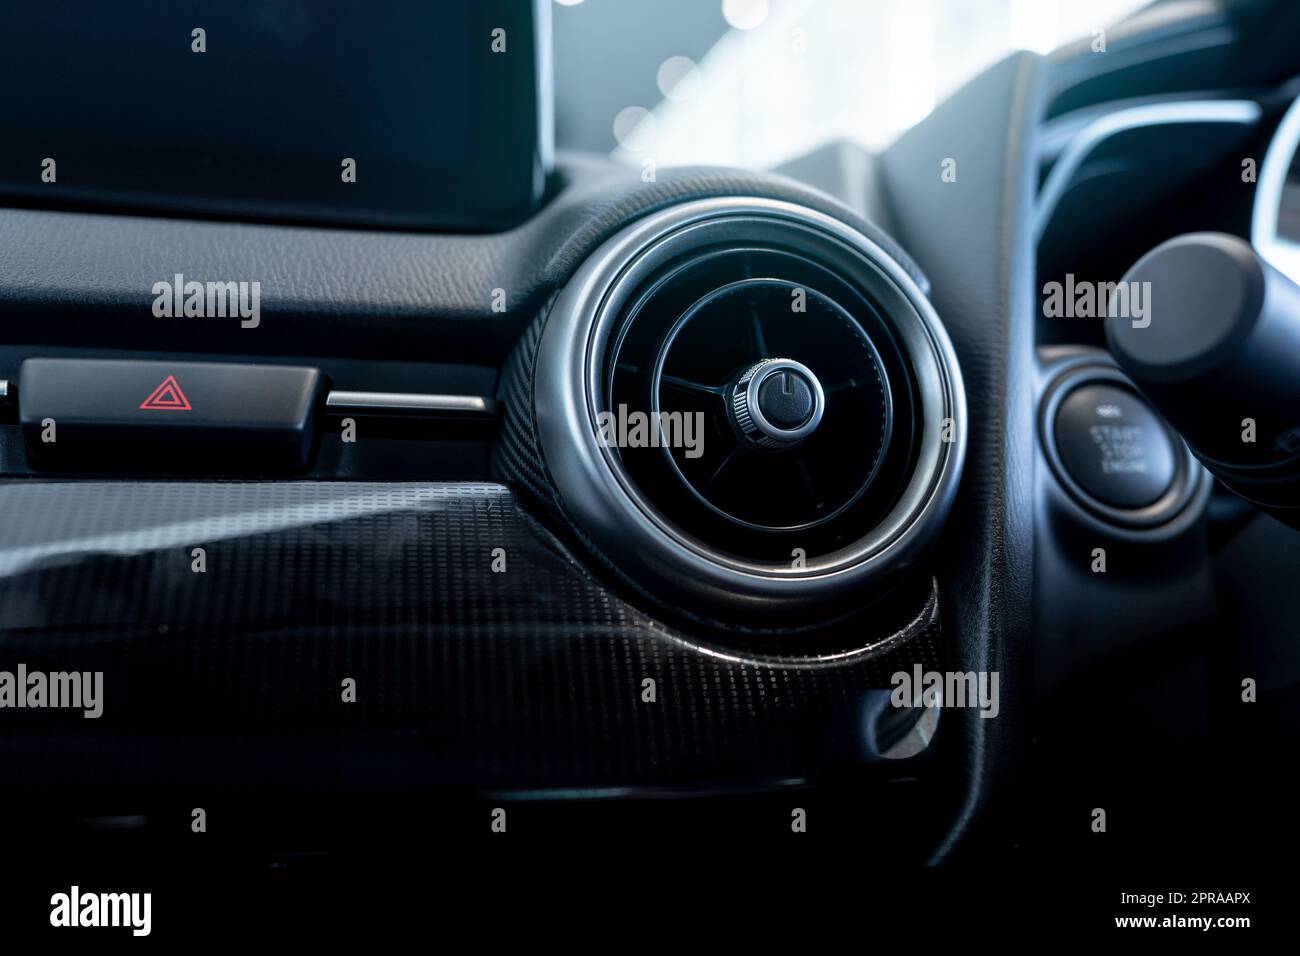 Car air vent. Car air conditioner. Automobile air conditioning system. Car ventilation system. Auto interior. Ventilation system in vehicle. Round air vent with modern design and adjusting knob. Stock Photo